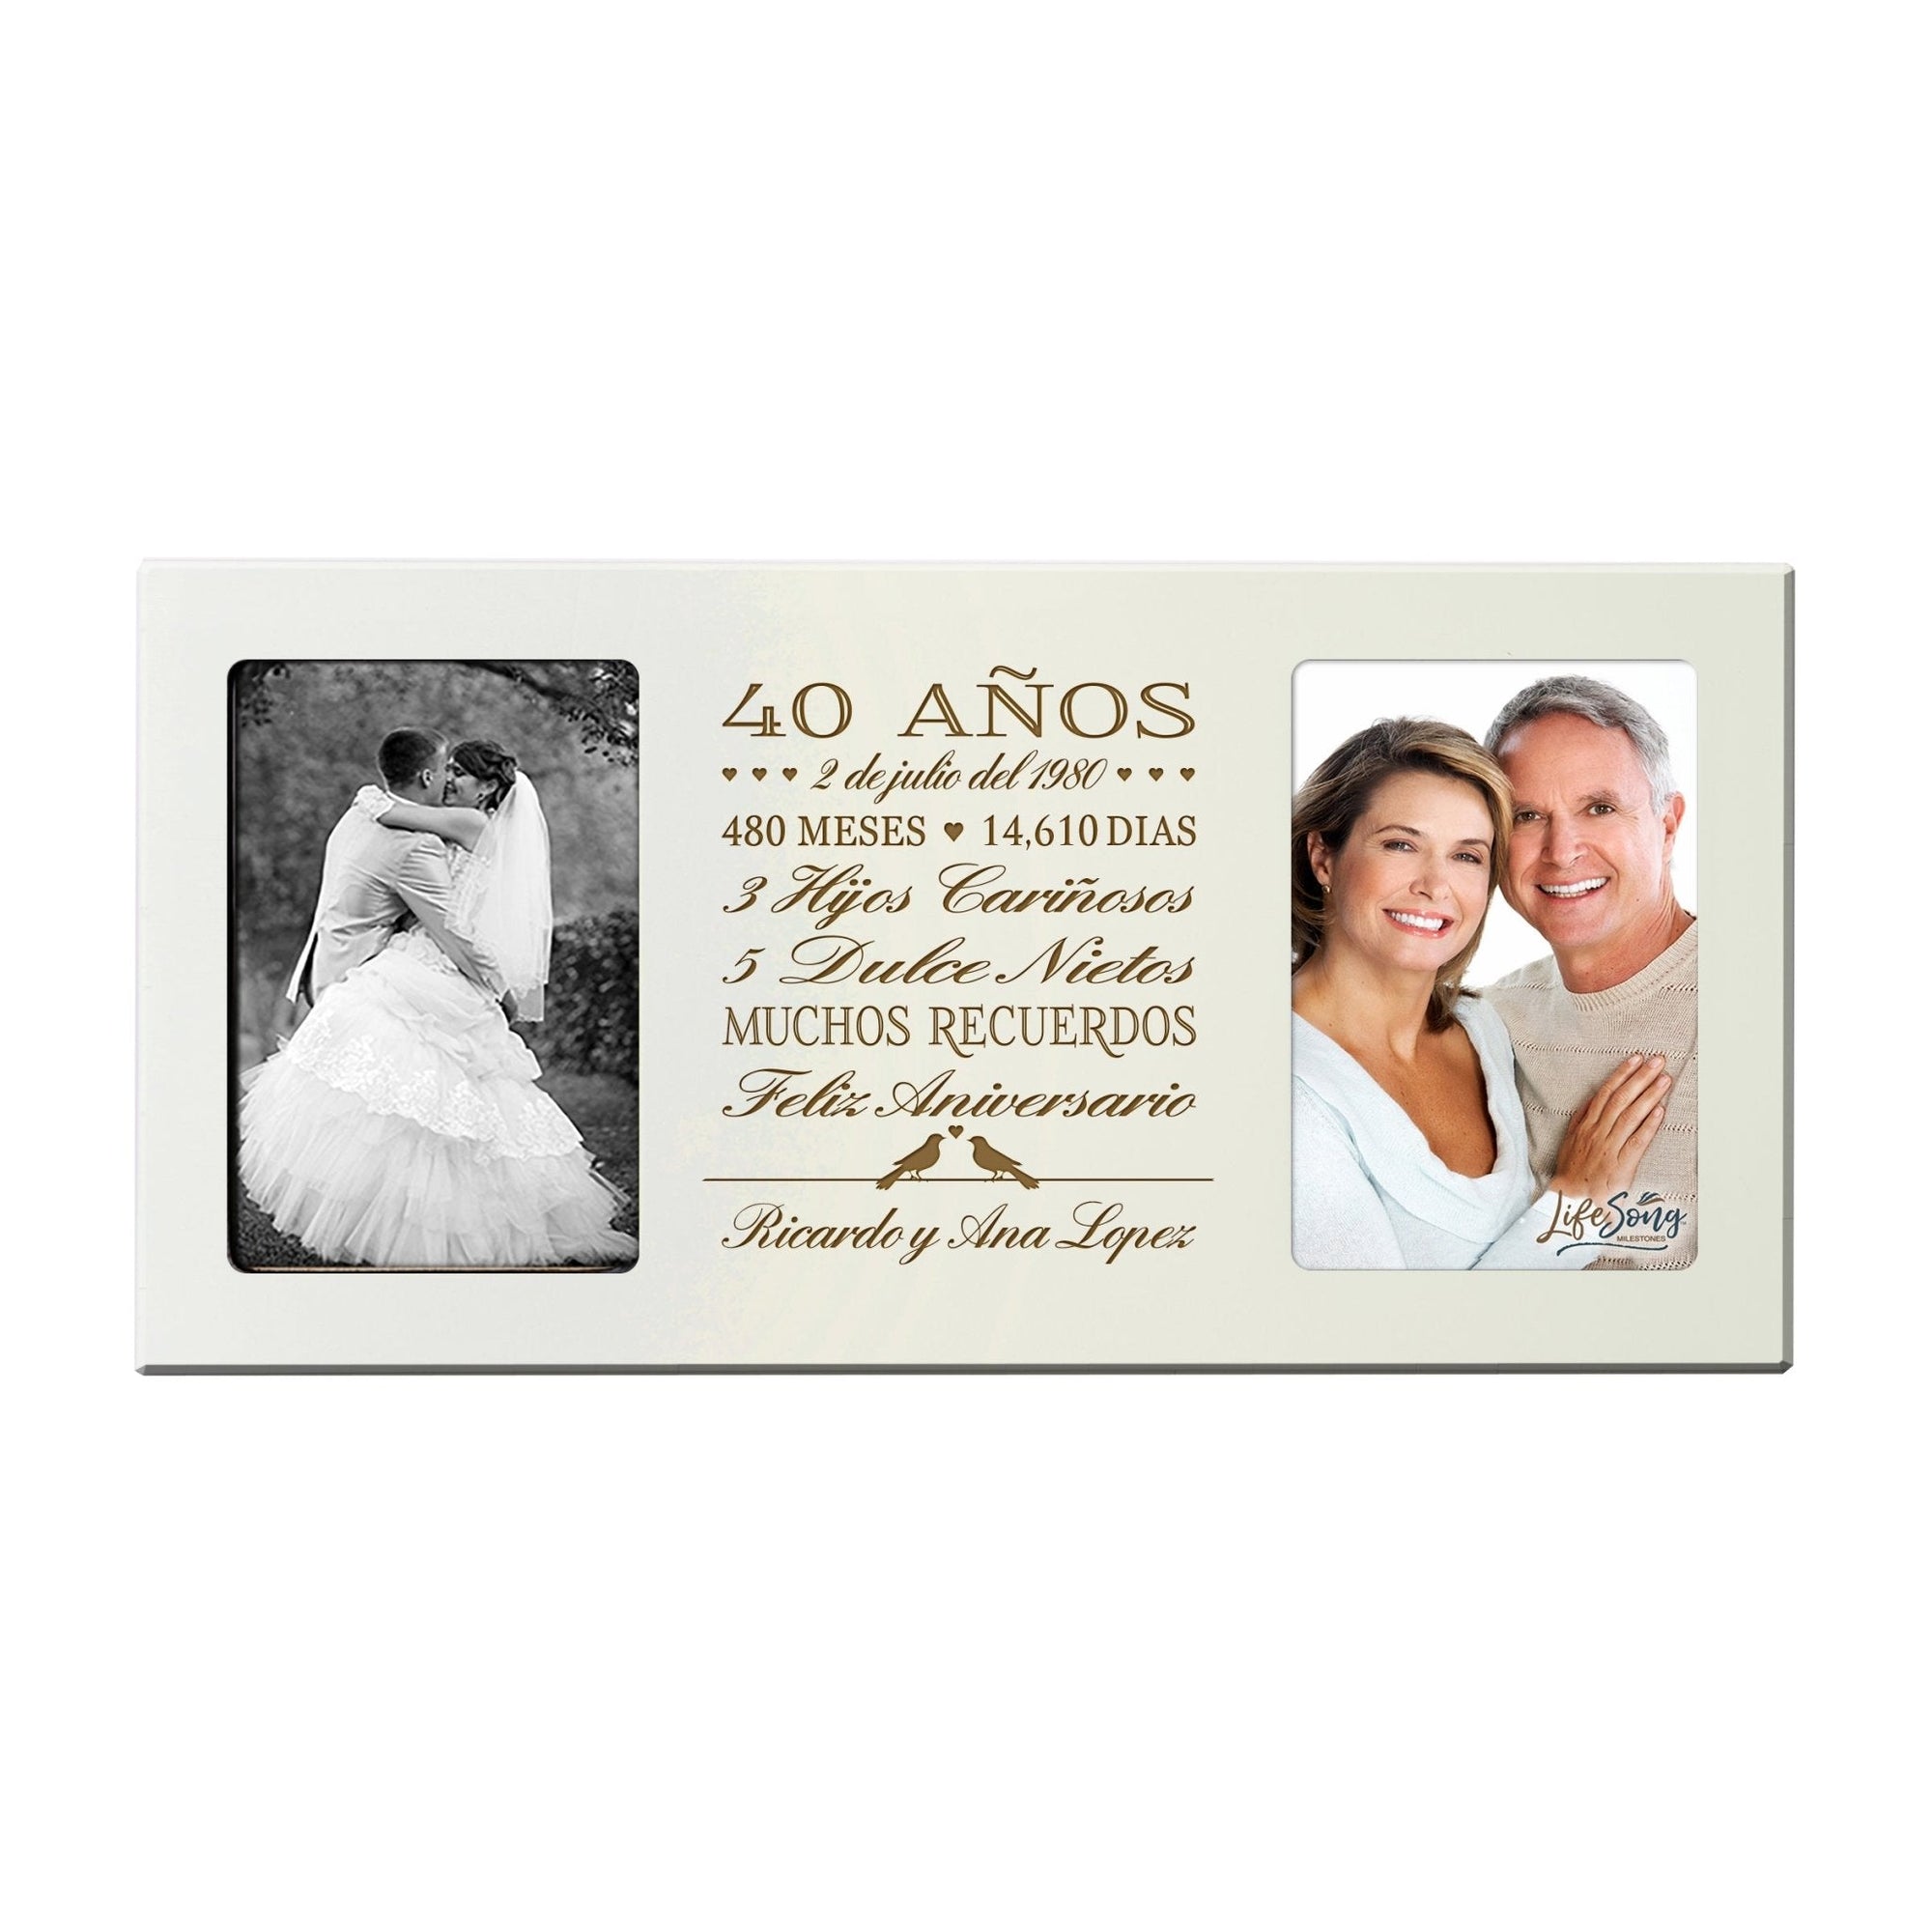 Lifesong Milestones Personalized Couples 40th Wedding Anniversary Spanish Picture Frame